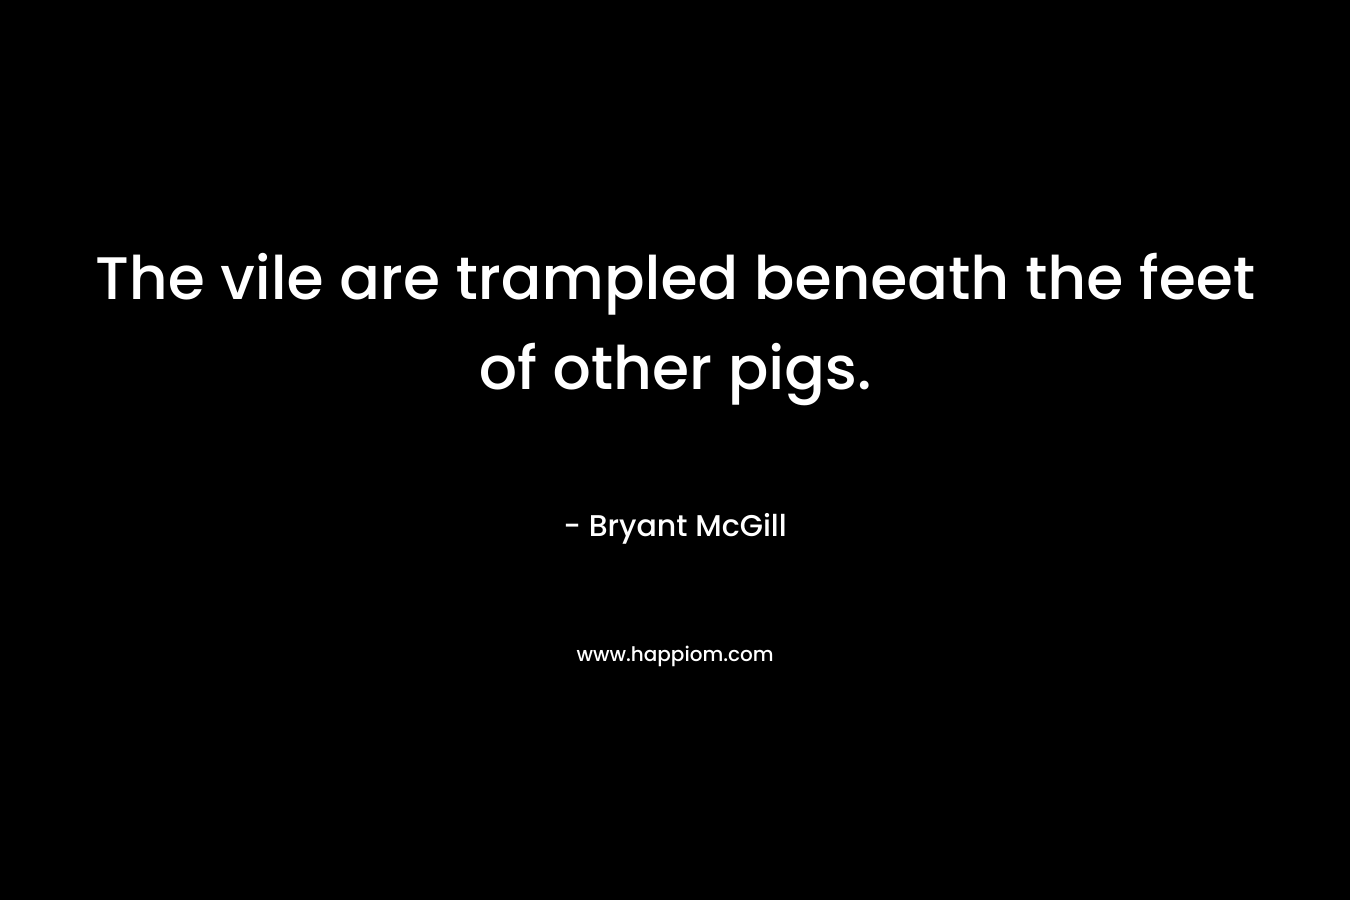 The vile are trampled beneath the feet of other pigs. – Bryant McGill